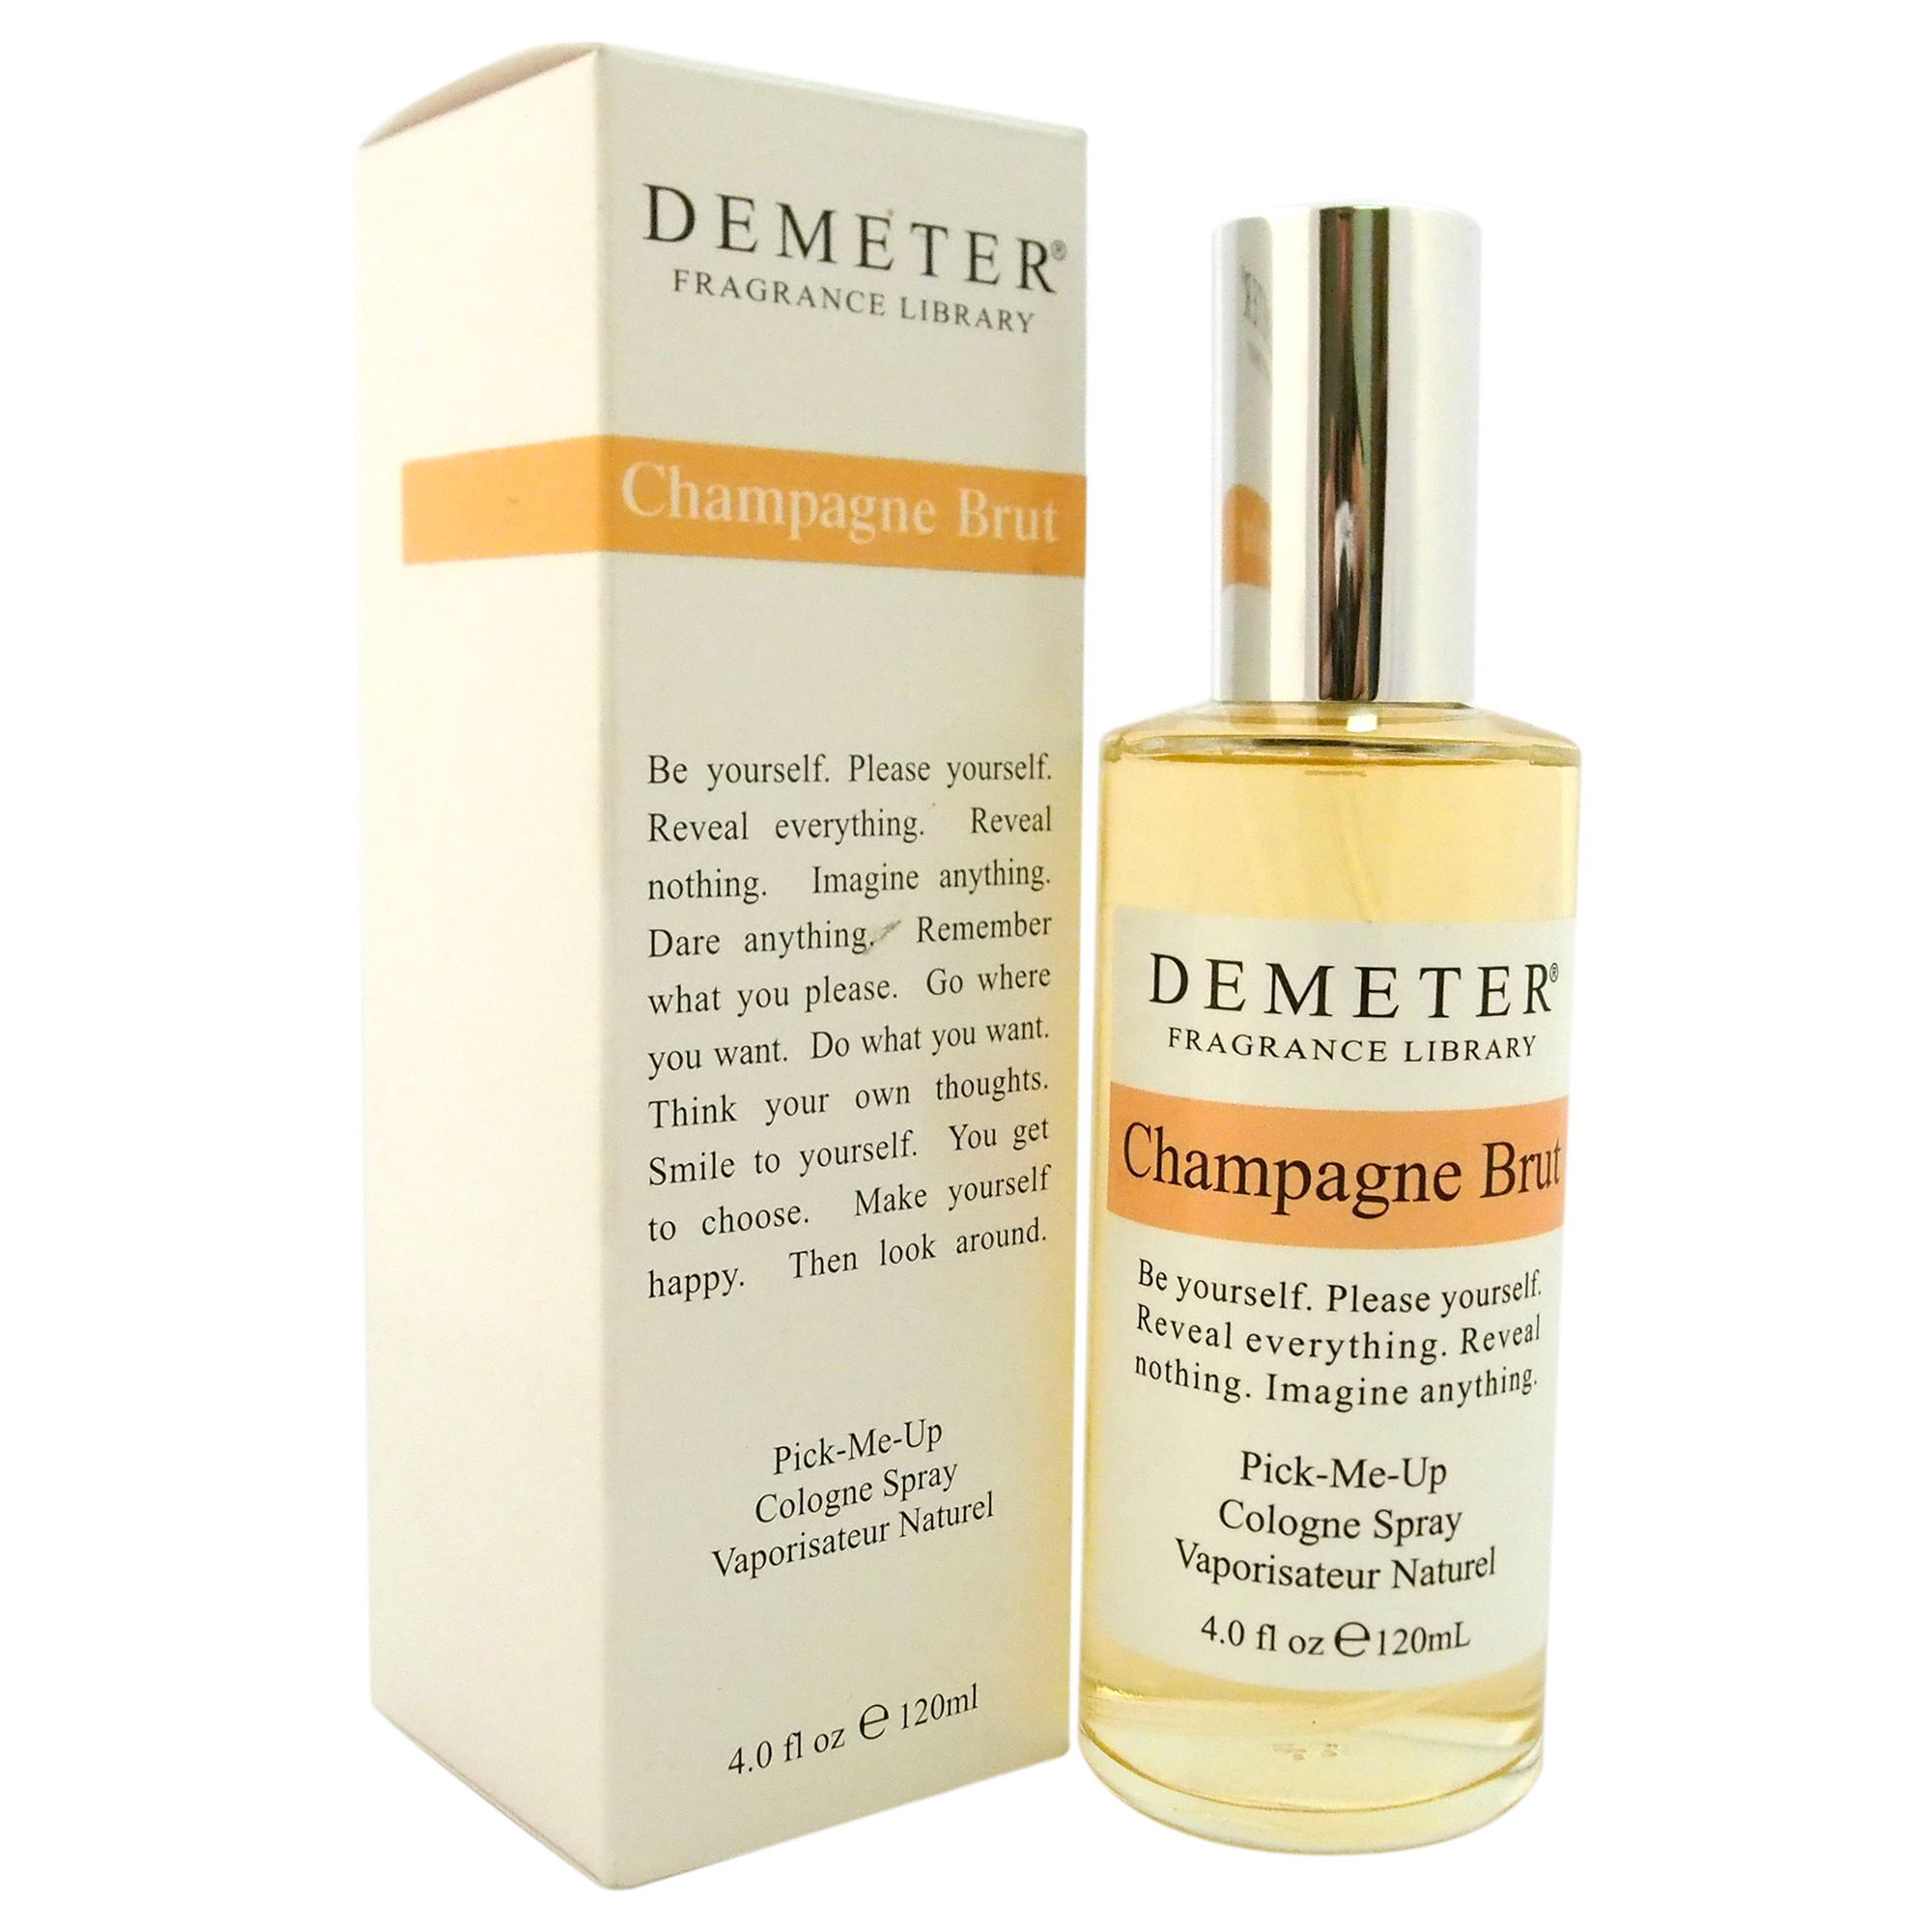 Champagne Brut by Demeter for Women - 4 oz Cologne Spray